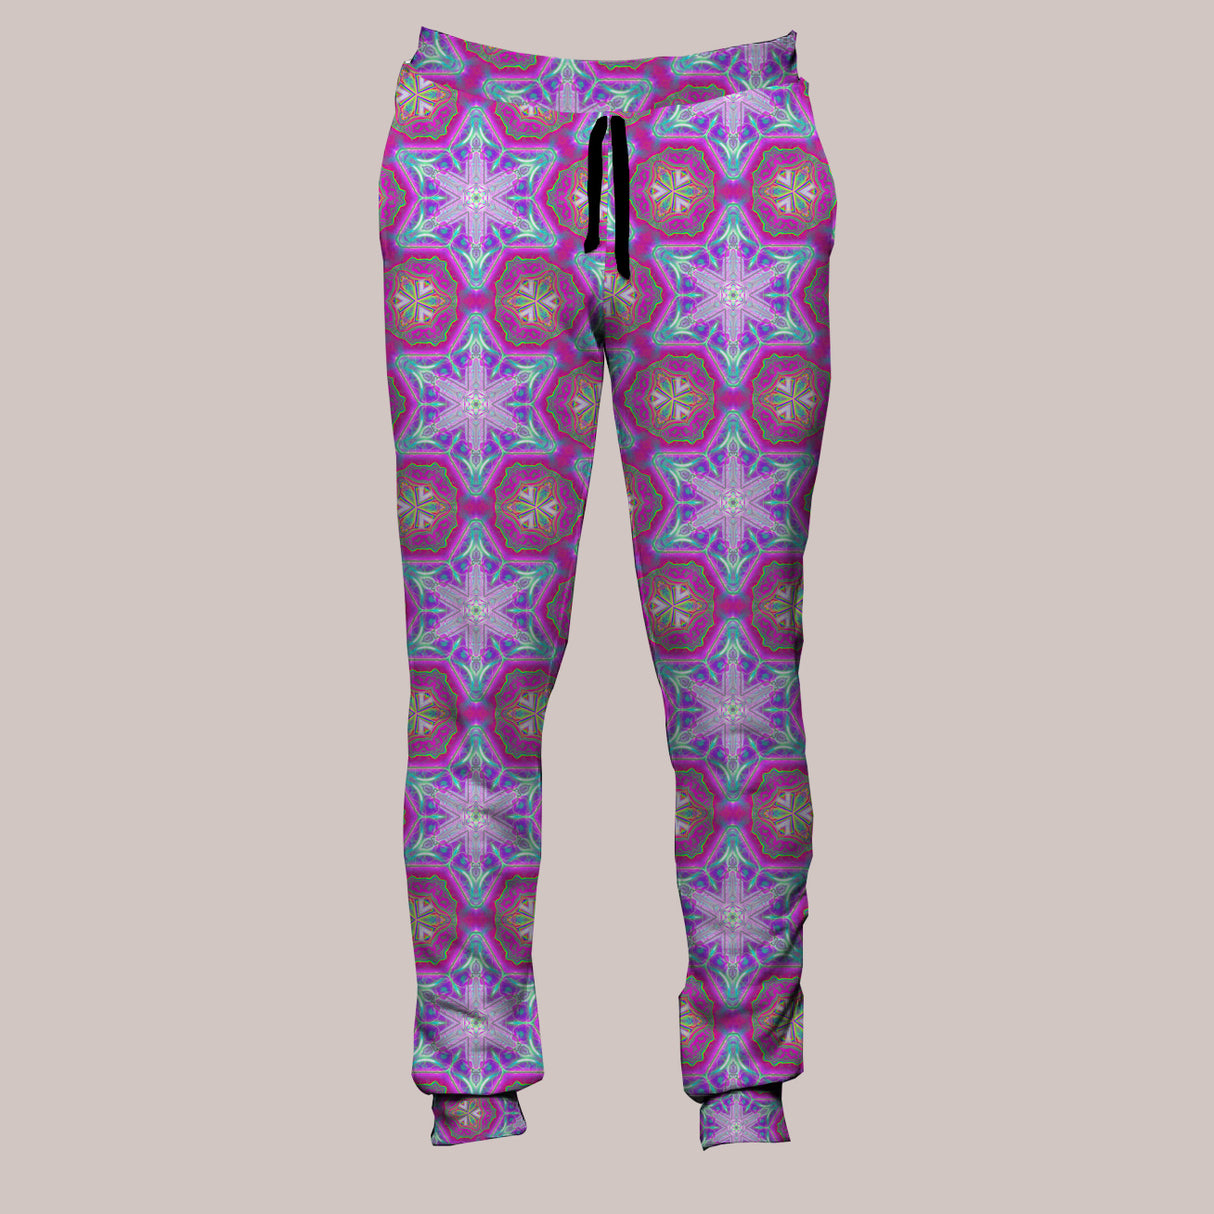 Entheoelectric ♢ Joggers